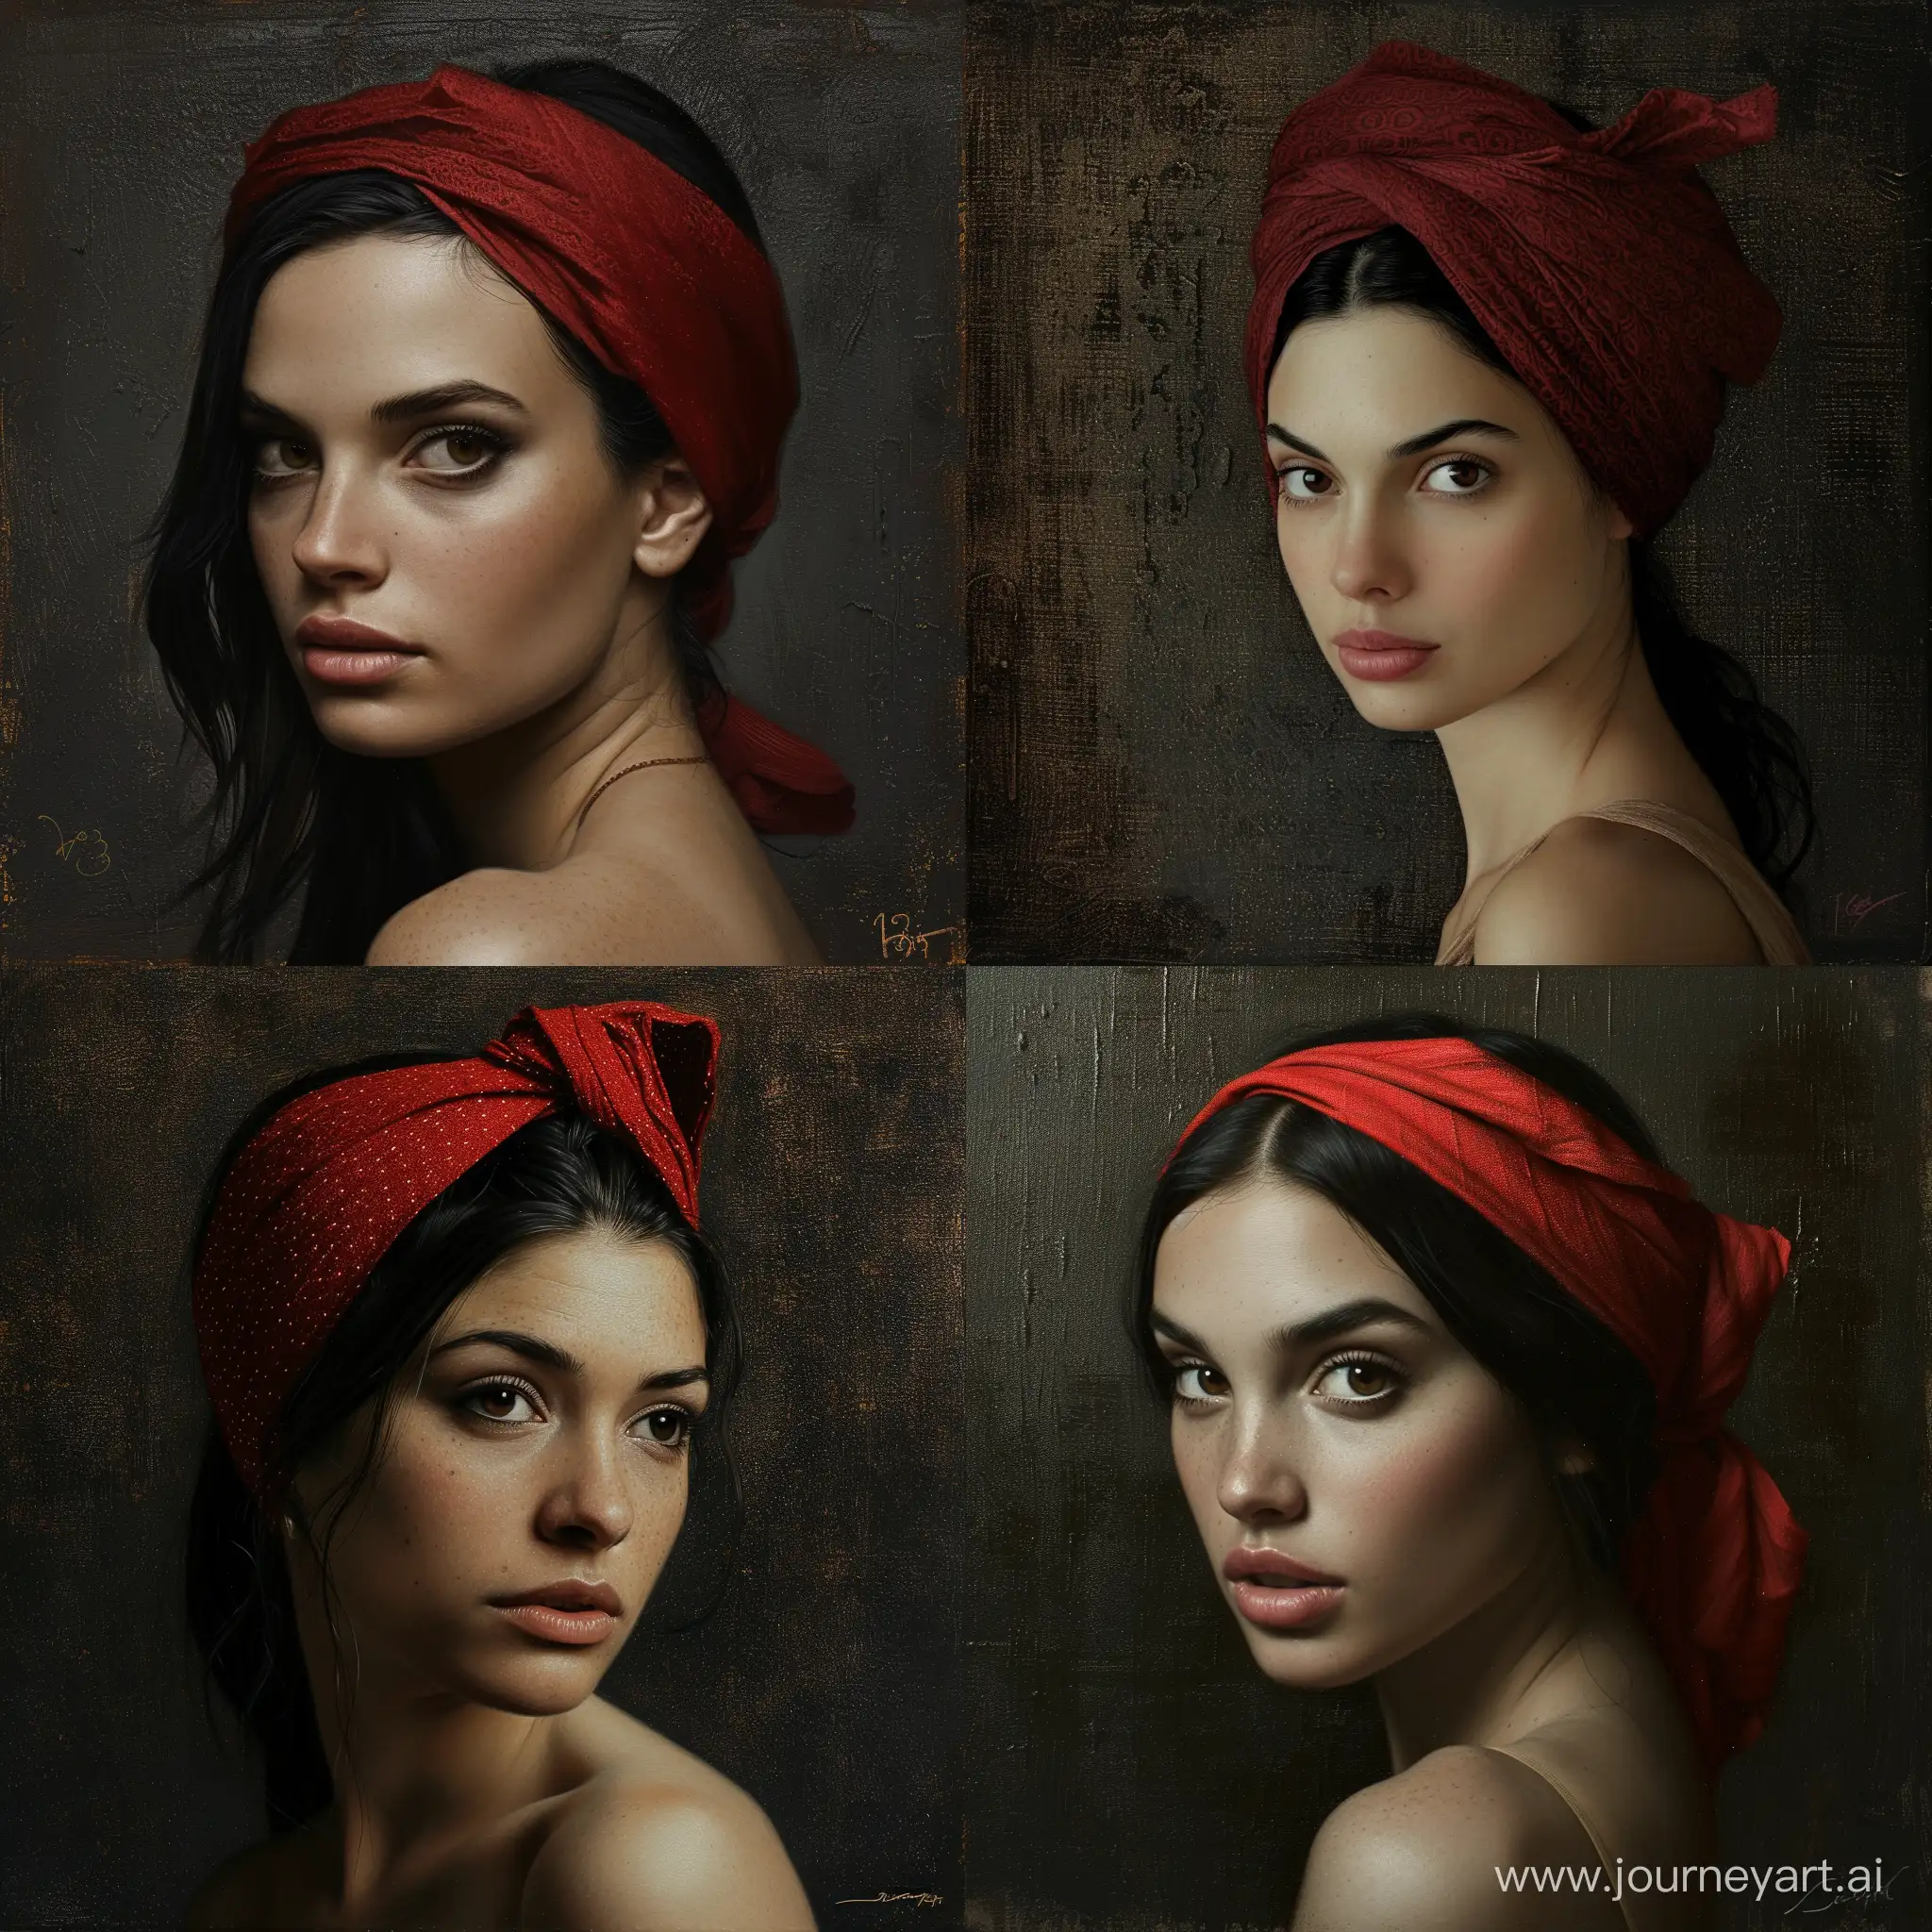 Realistic-Portrait-of-Woman-with-Contemplative-Expression-and-Red-Headband